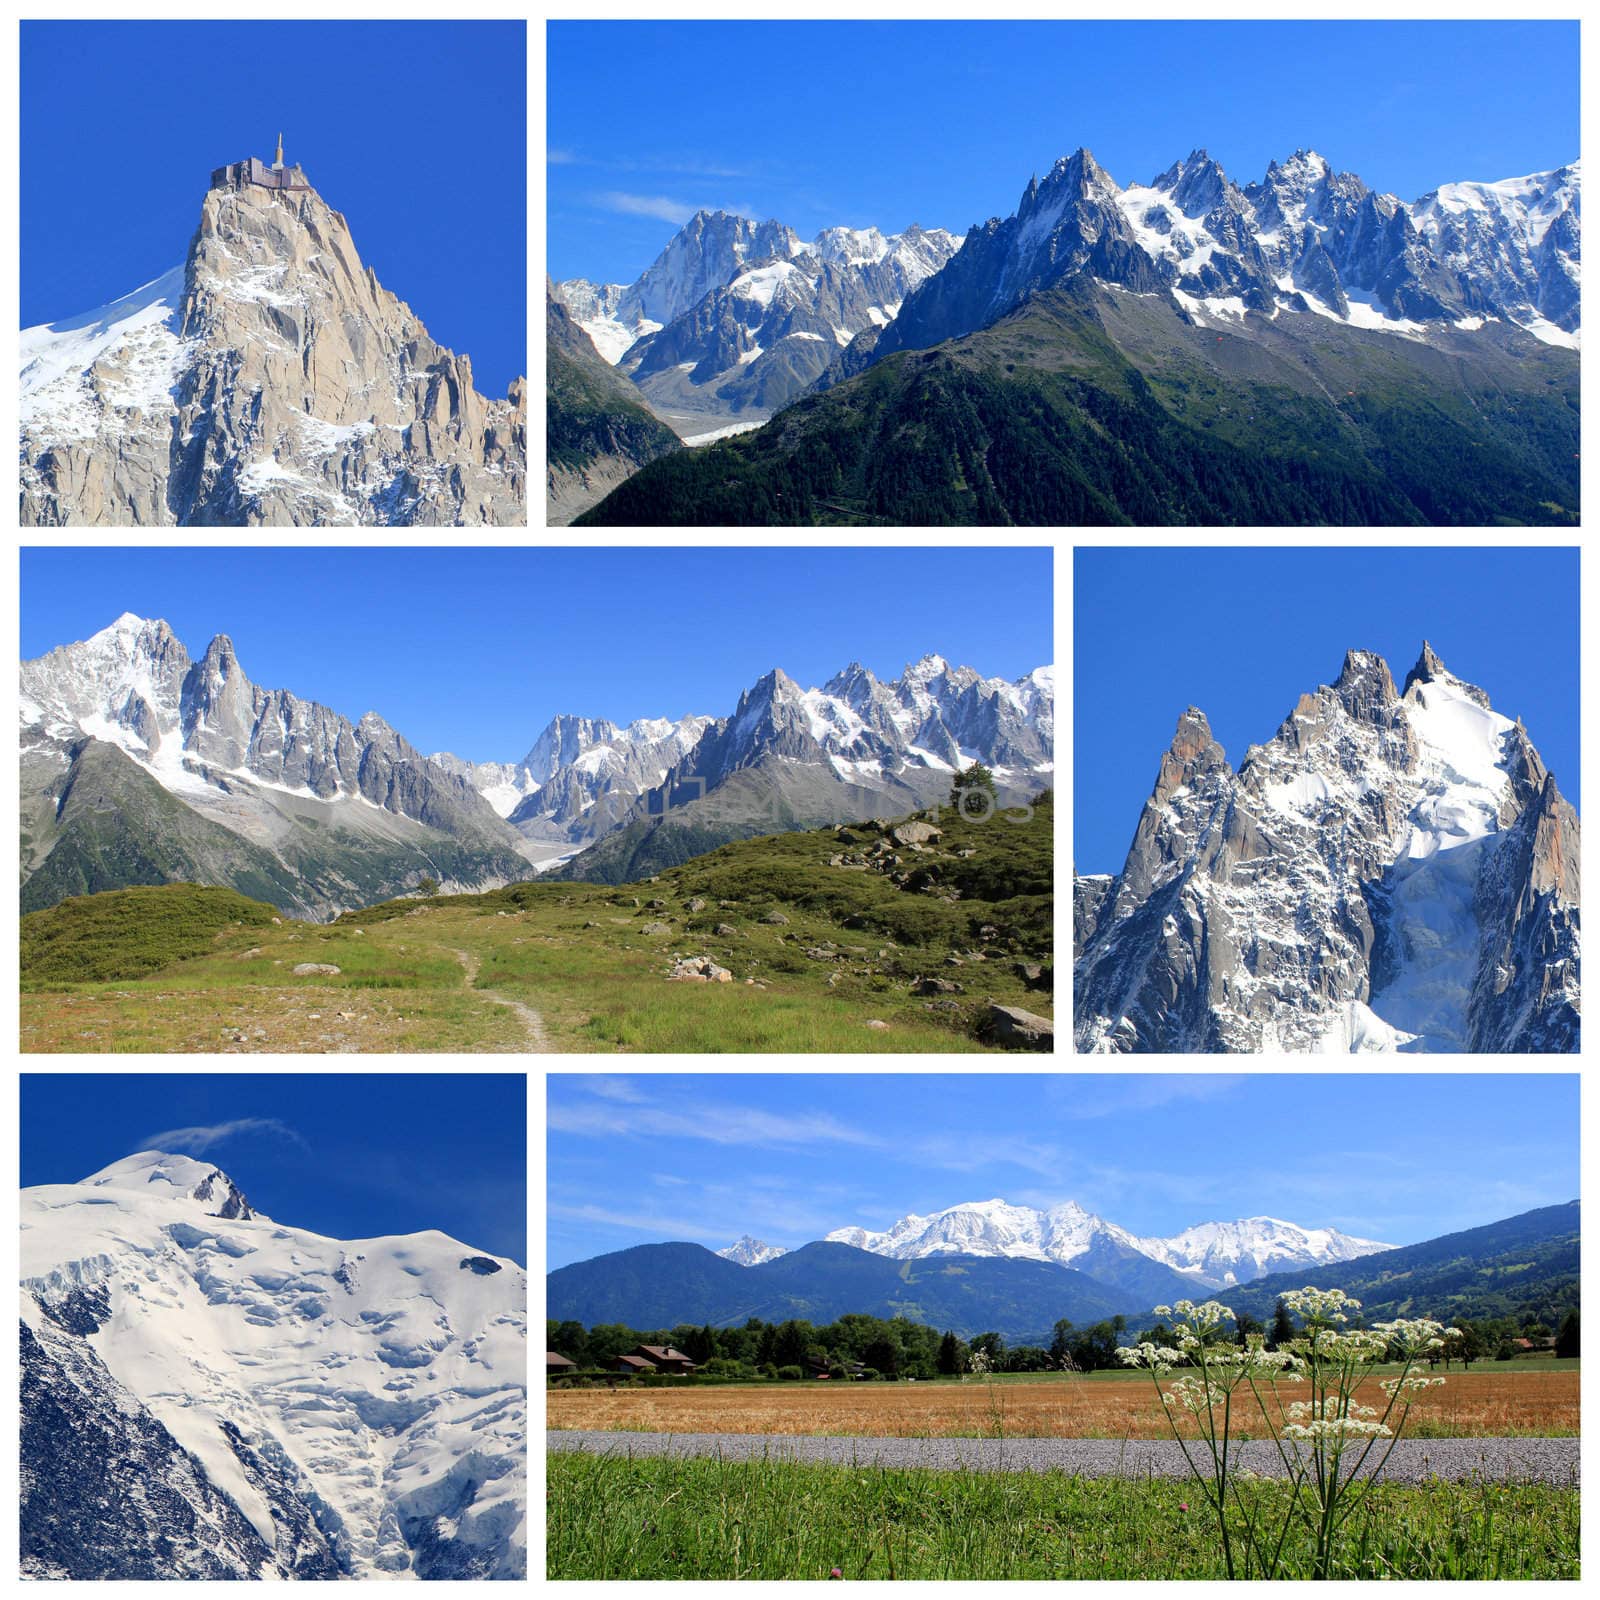 Mont-Blanc collage, France by Elenaphotos21